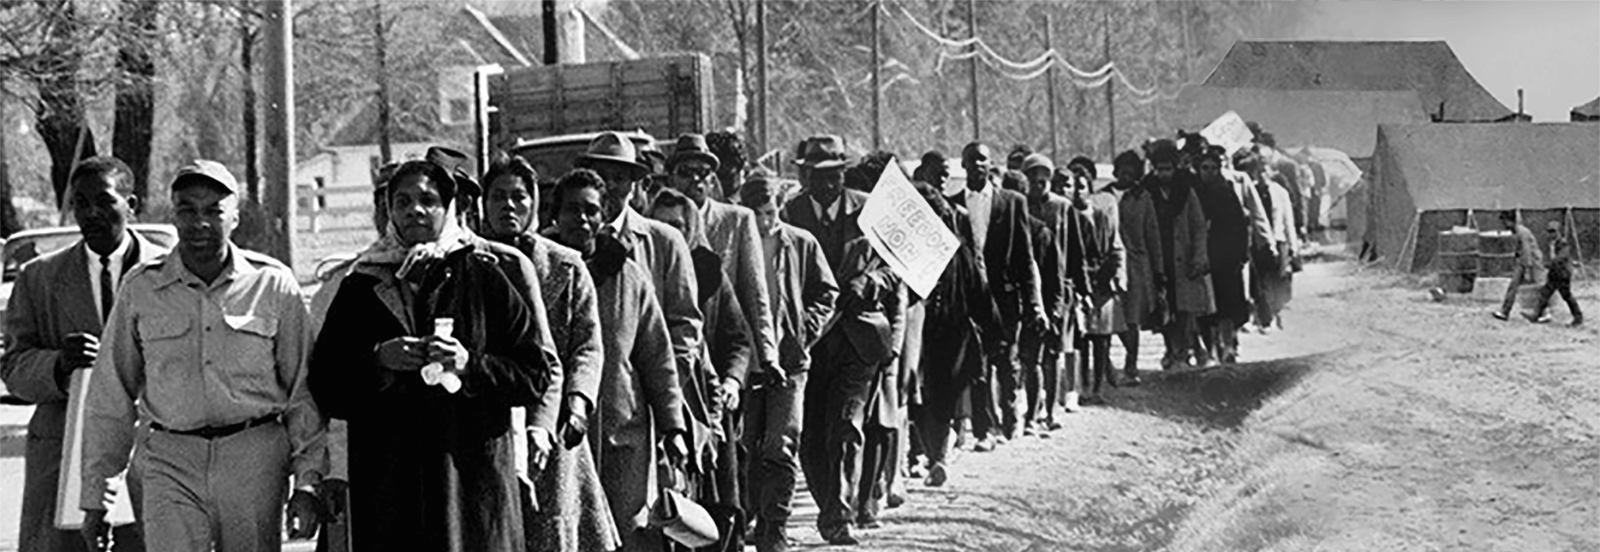 Fayette County Civil Rights Activist Marching. Photo (left) ©Art Shay, John and Viola McFerren leading protestors to the Fayette County, Tennessee Courthouse, March 1965.